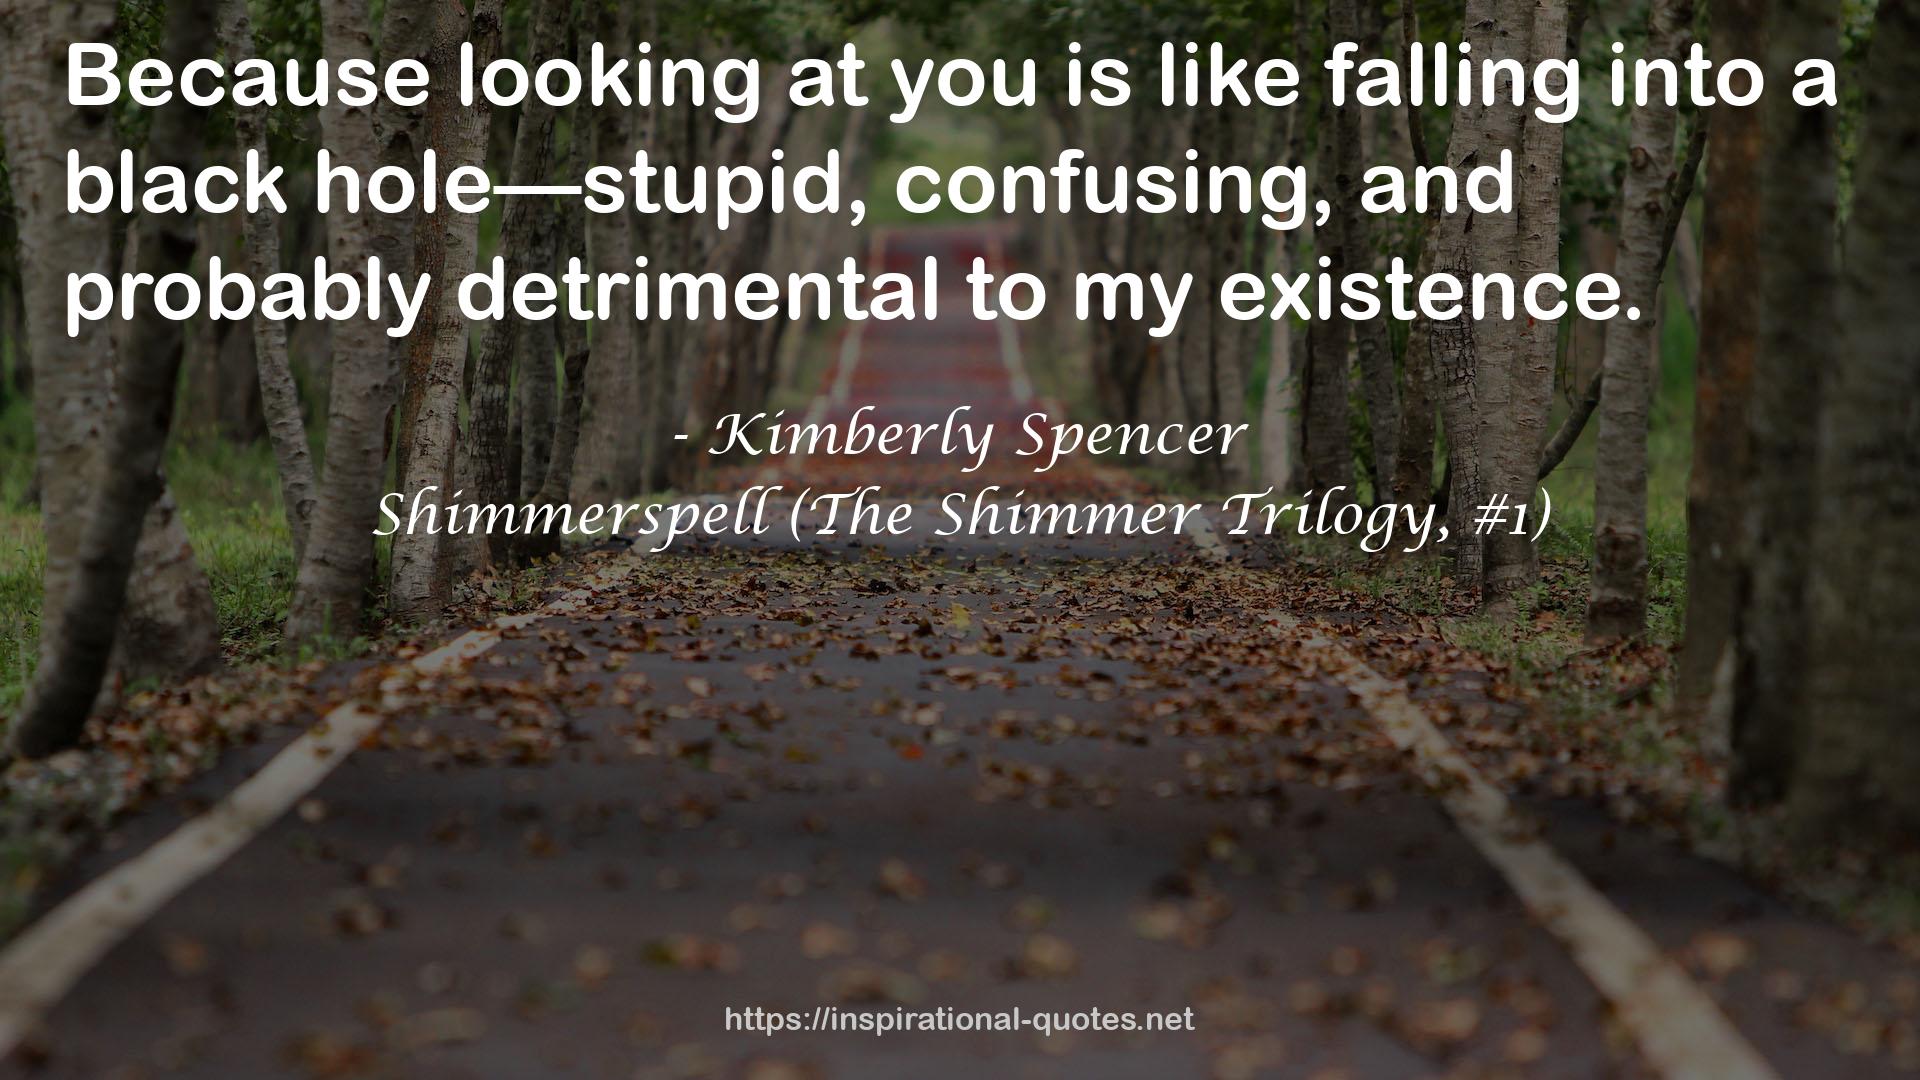 Shimmerspell (The Shimmer Trilogy, #1) QUOTES